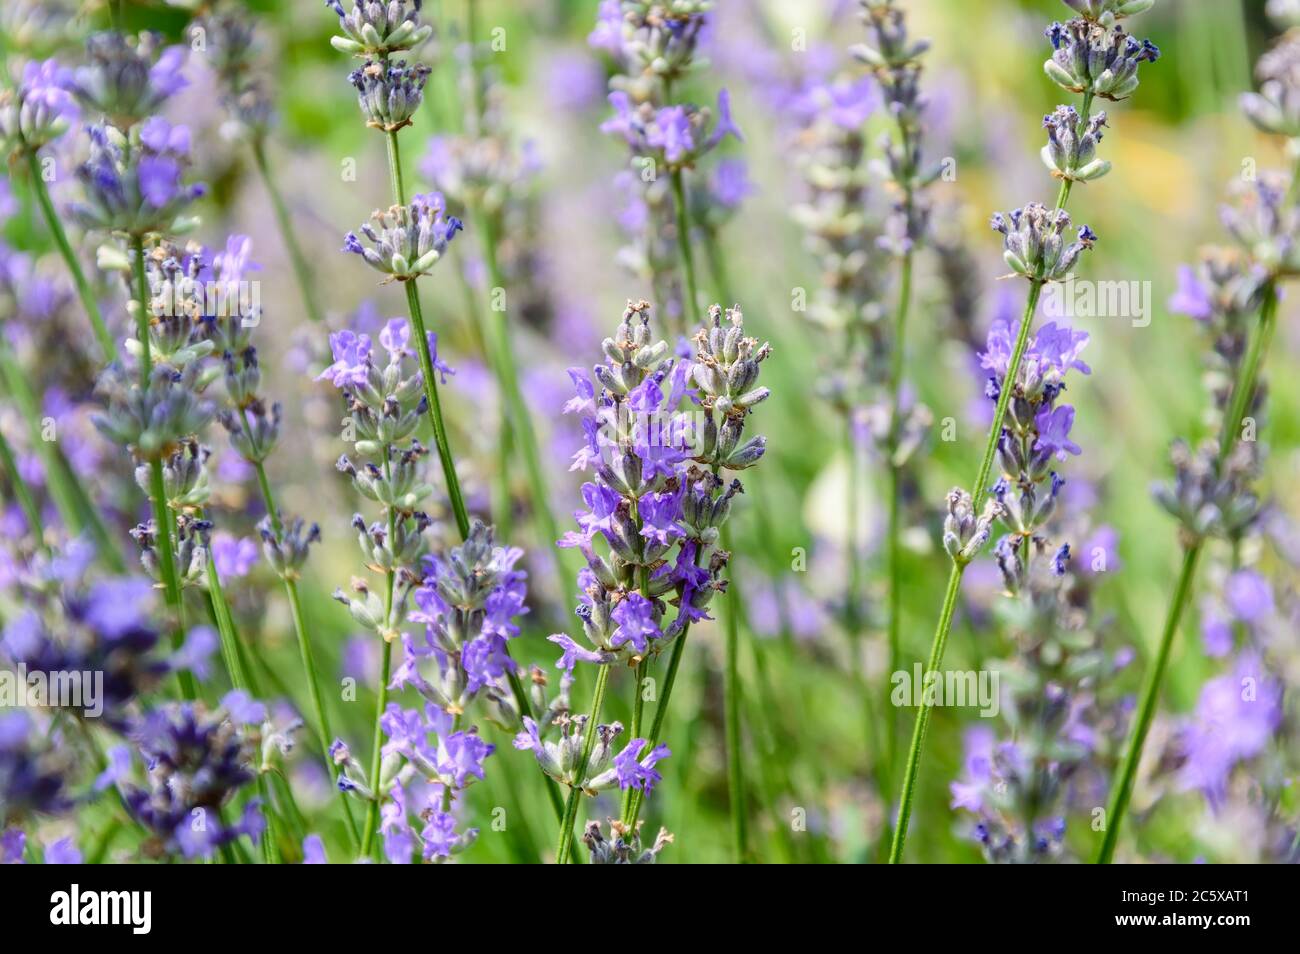 Purple lavender flowers in garden or in field on sunny summer day. Fragrant flowers with blurred green grass in the background Stock Photo